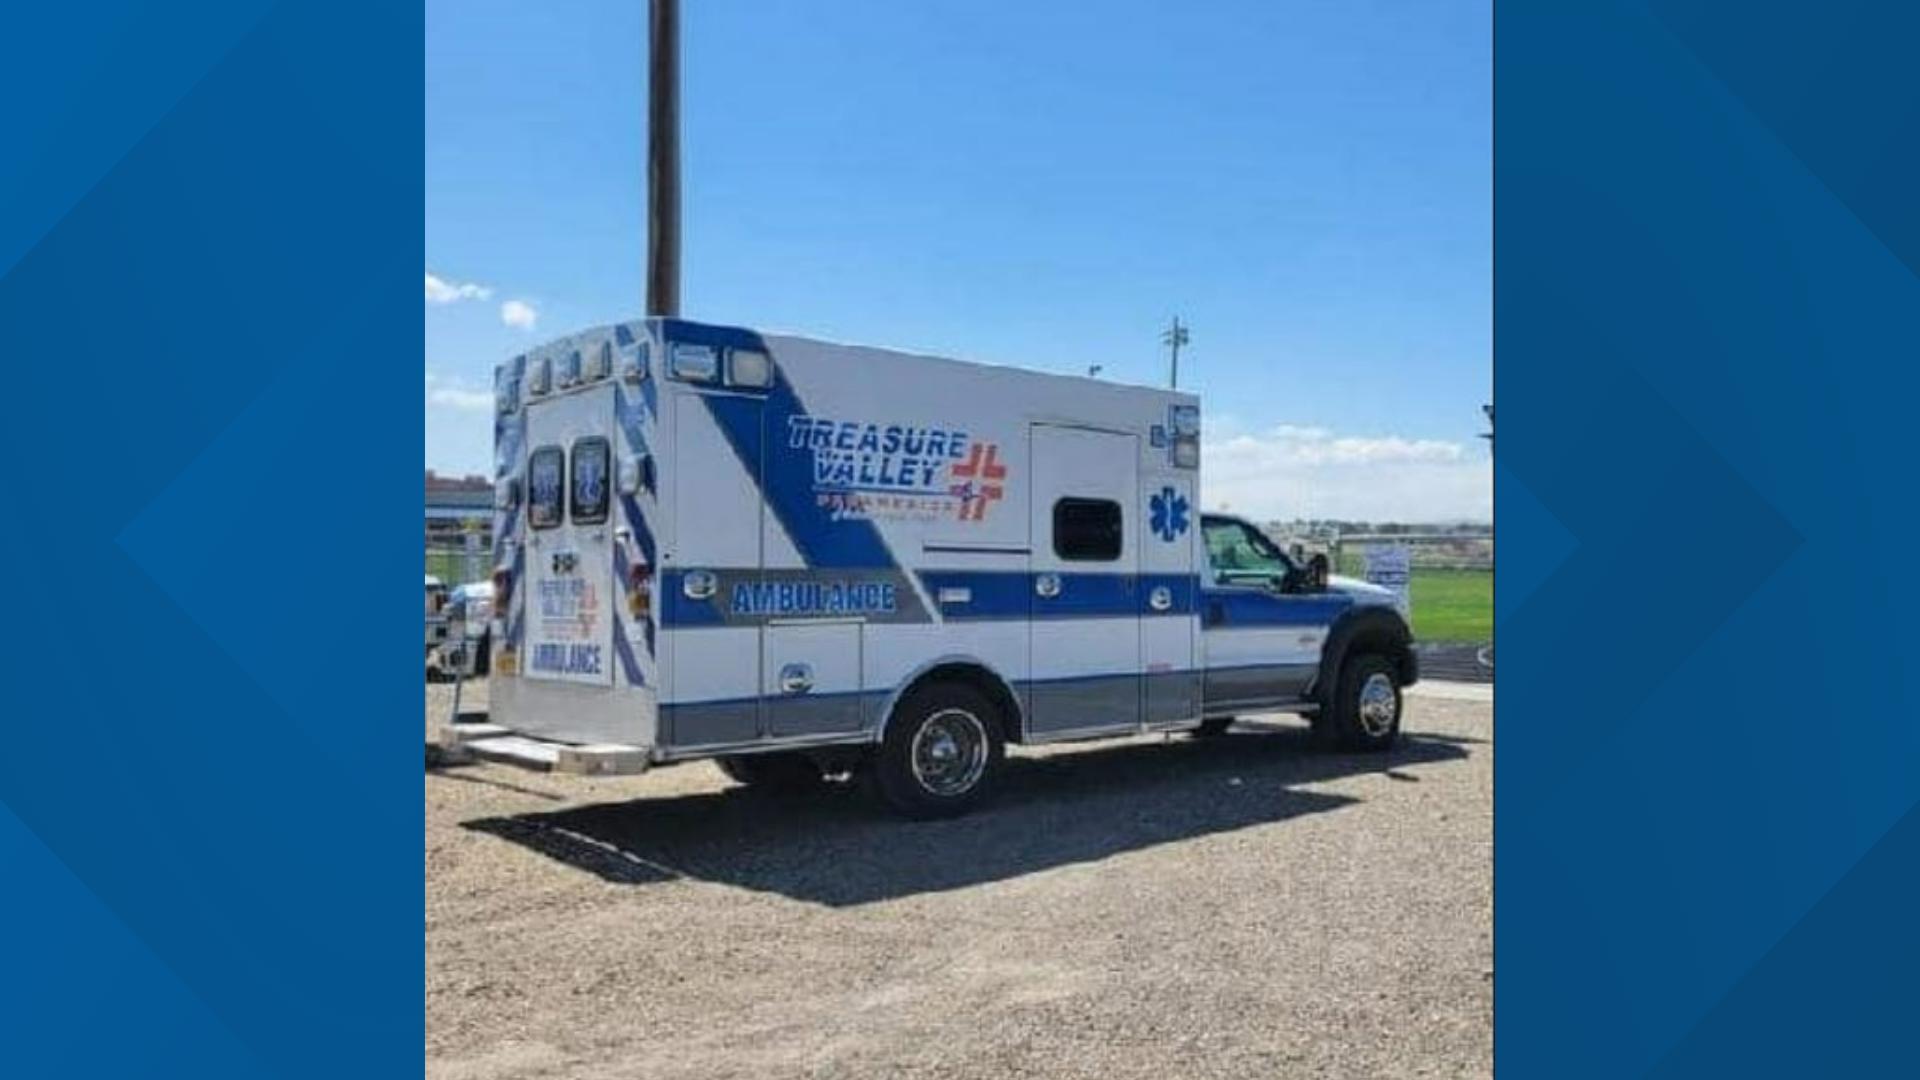 Owyhee County Deputy Steve Crawford said a suspect is in custody after an ambulance was stolen Monday from Saint Alphonsus Medical Center in Ontario.